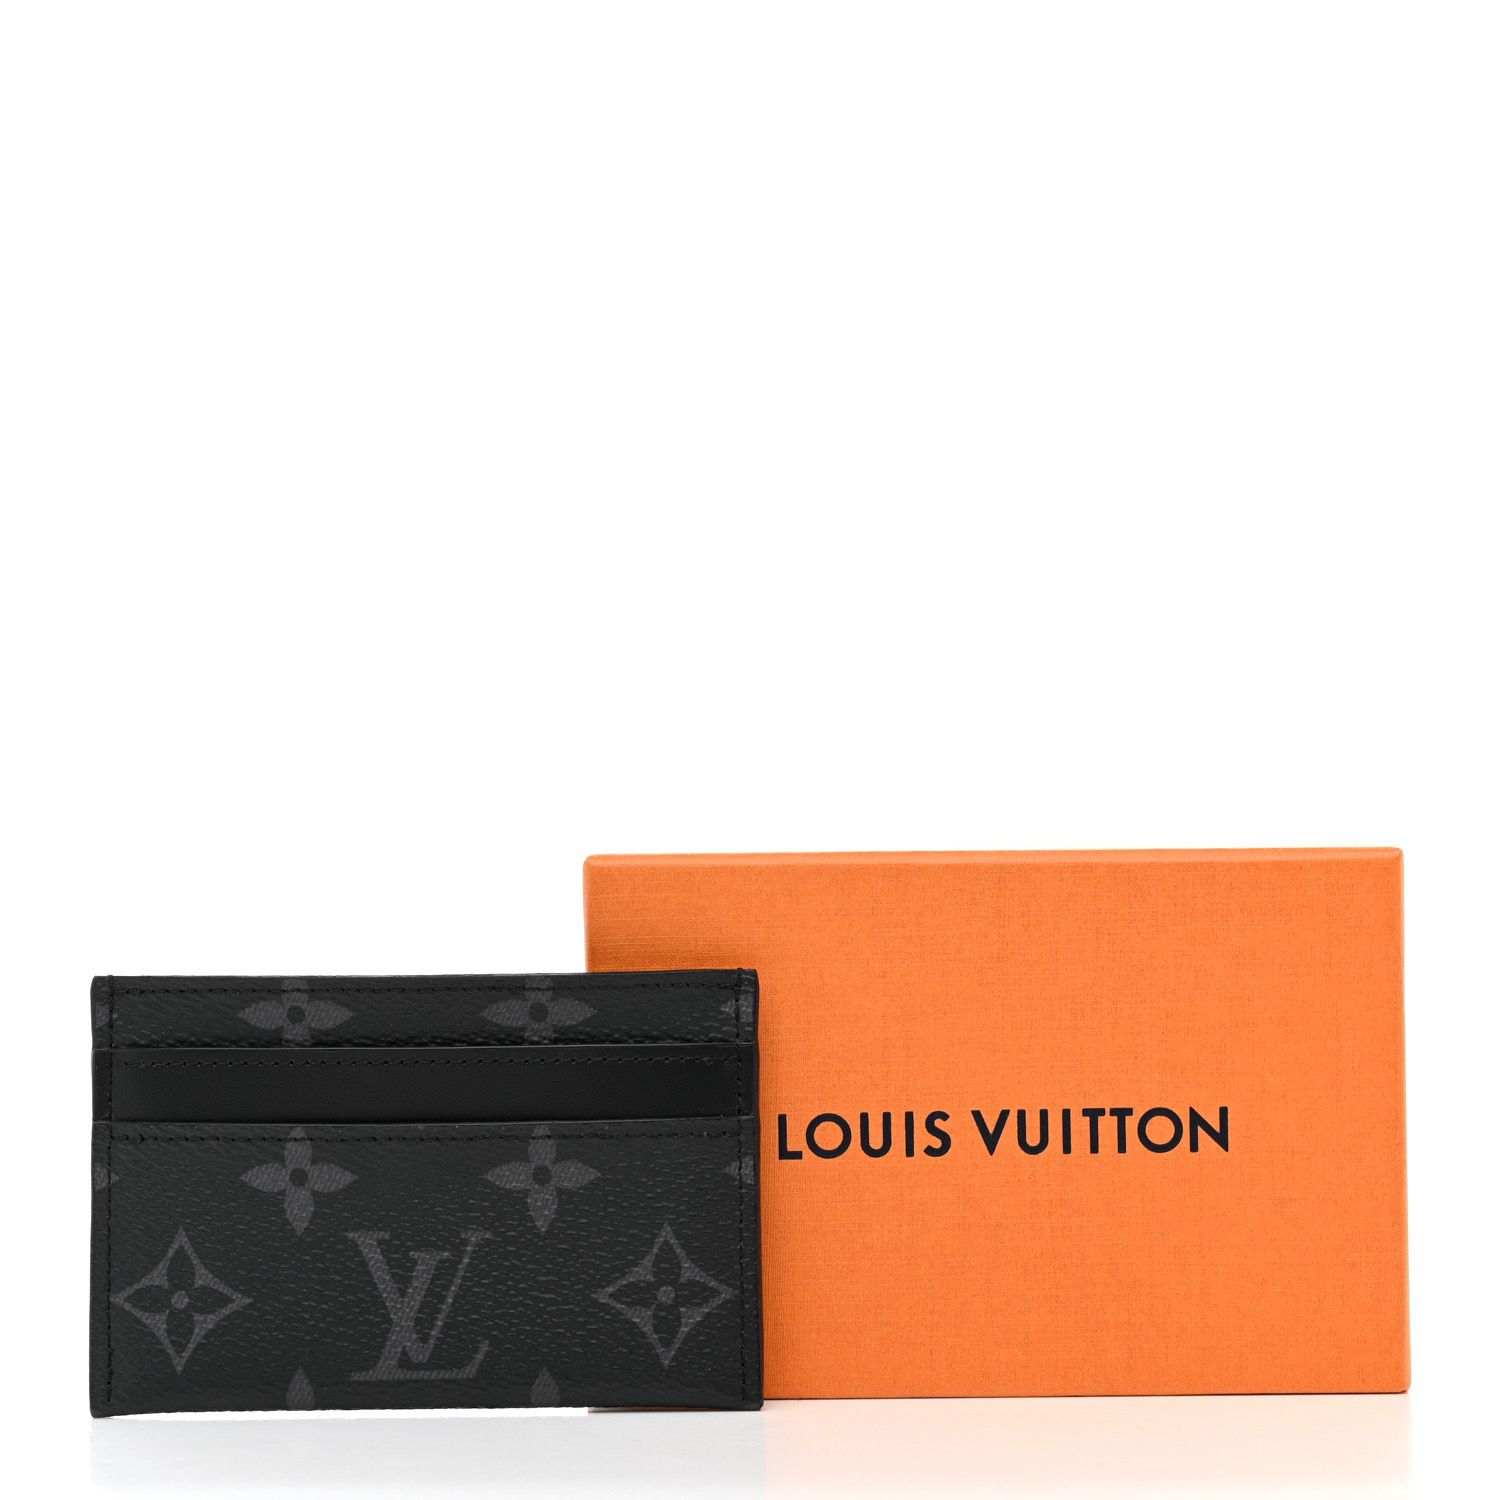 Louis Vuitton Double Cardholder Wallet - Monogram Eclipse Brand New for Sale  in Collinsville, IL - OfferUp